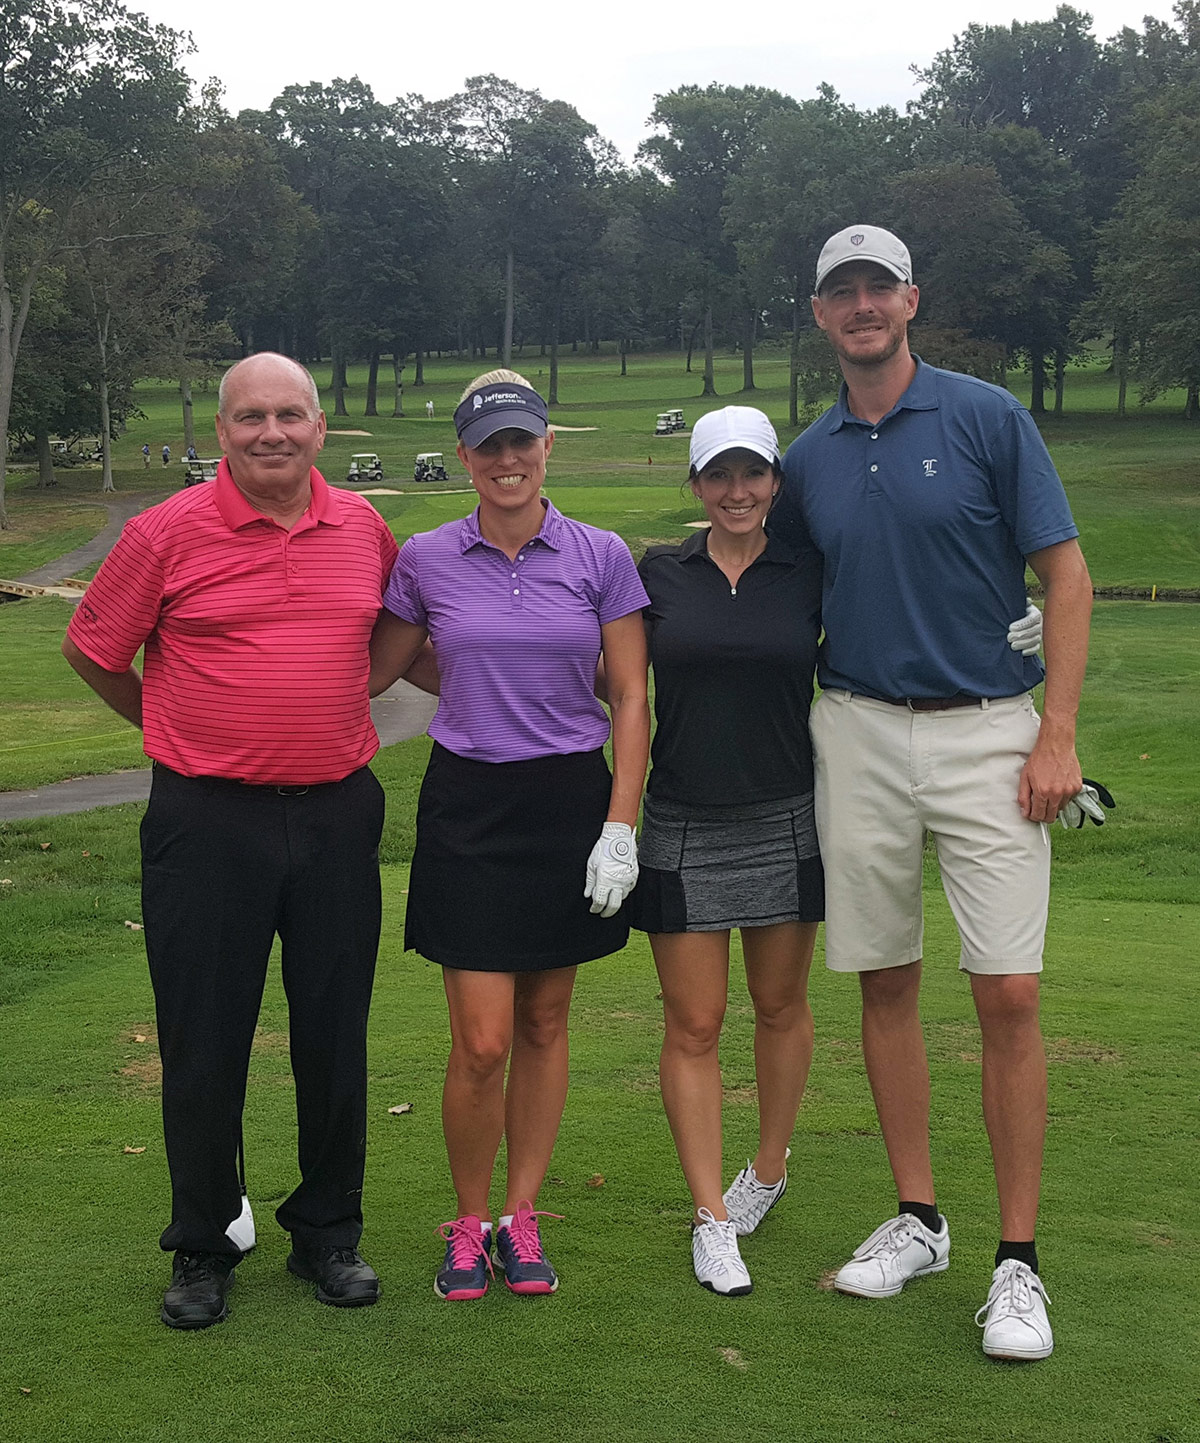 The Abington/Jefferson golf foursome enjoys a day on the course at the EMCCC golf outing.